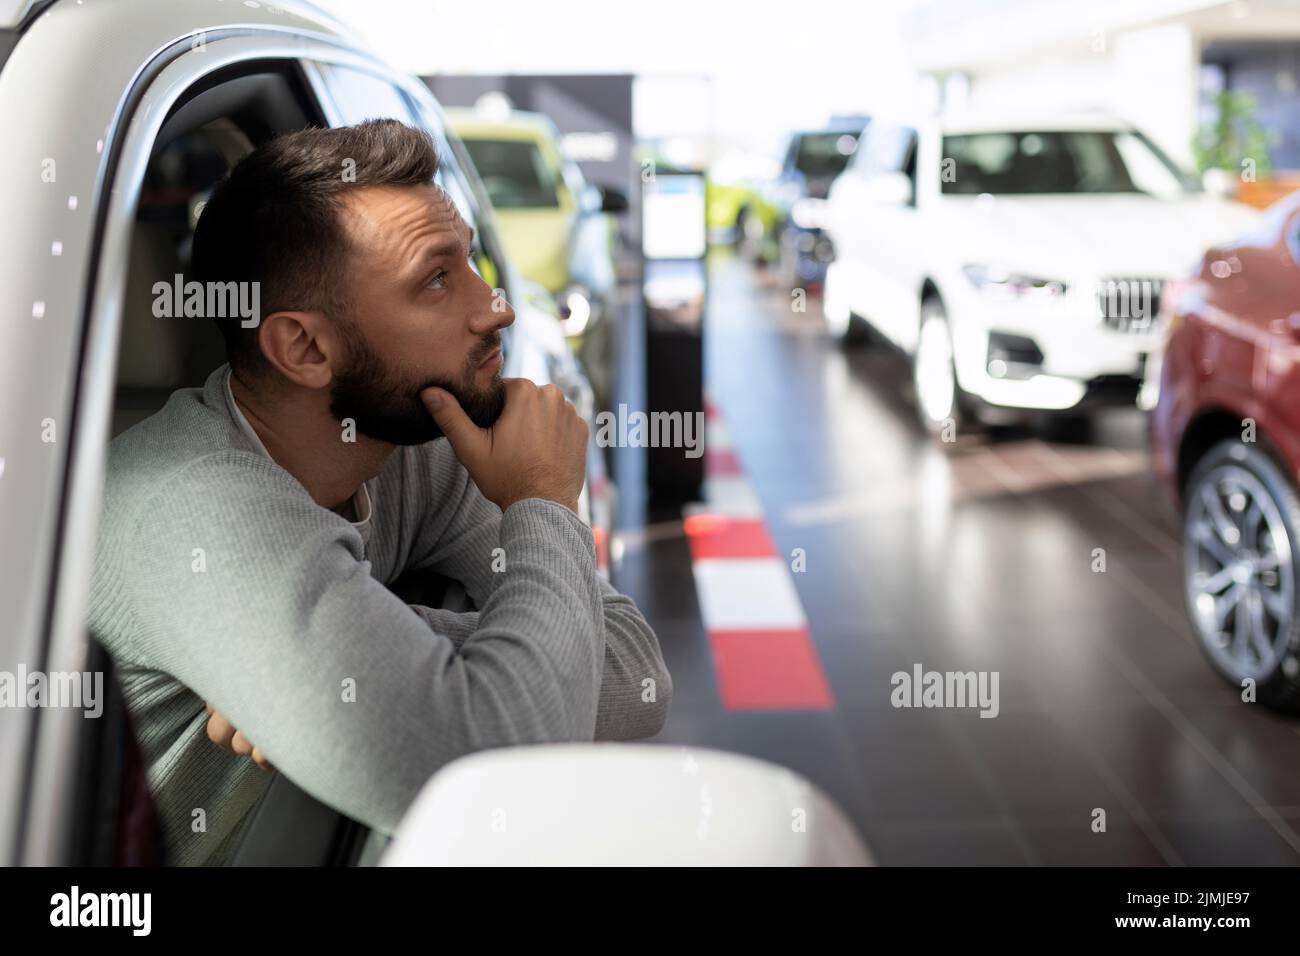 A man in a car dealership dreaming about buying a new car Stock Photo